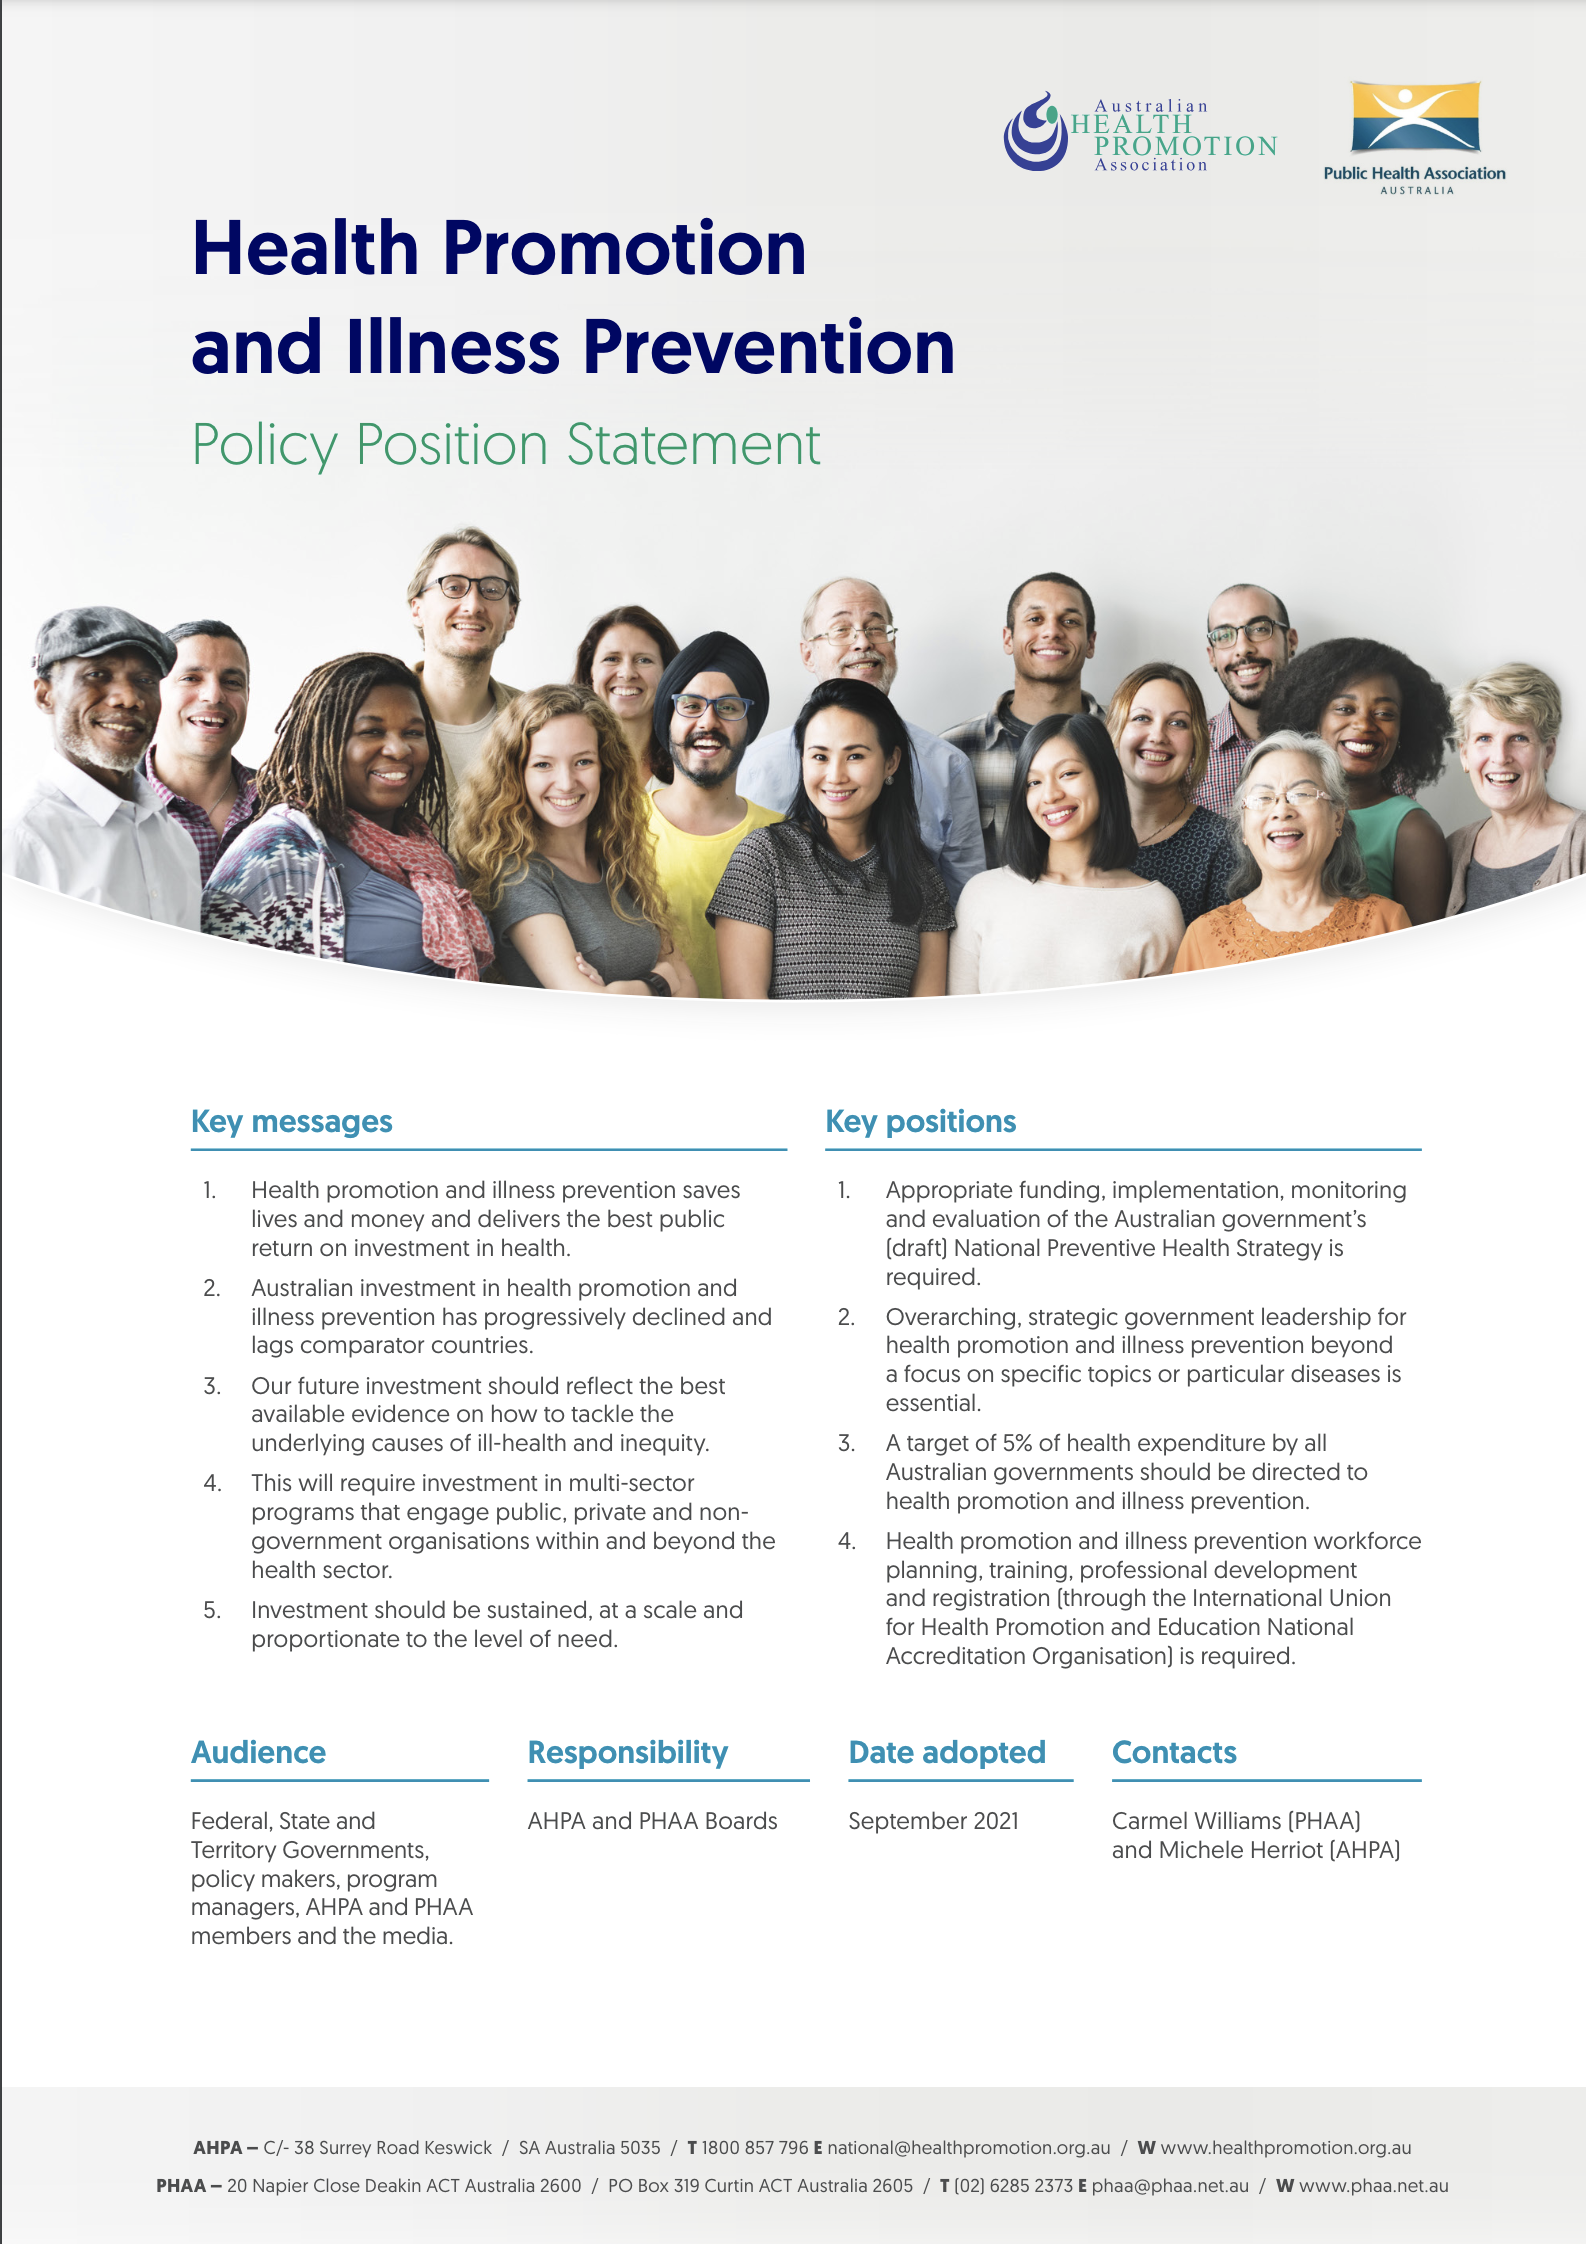 AHPA and PHAA Health Promotion and Illness Prevention Policy Position Statement